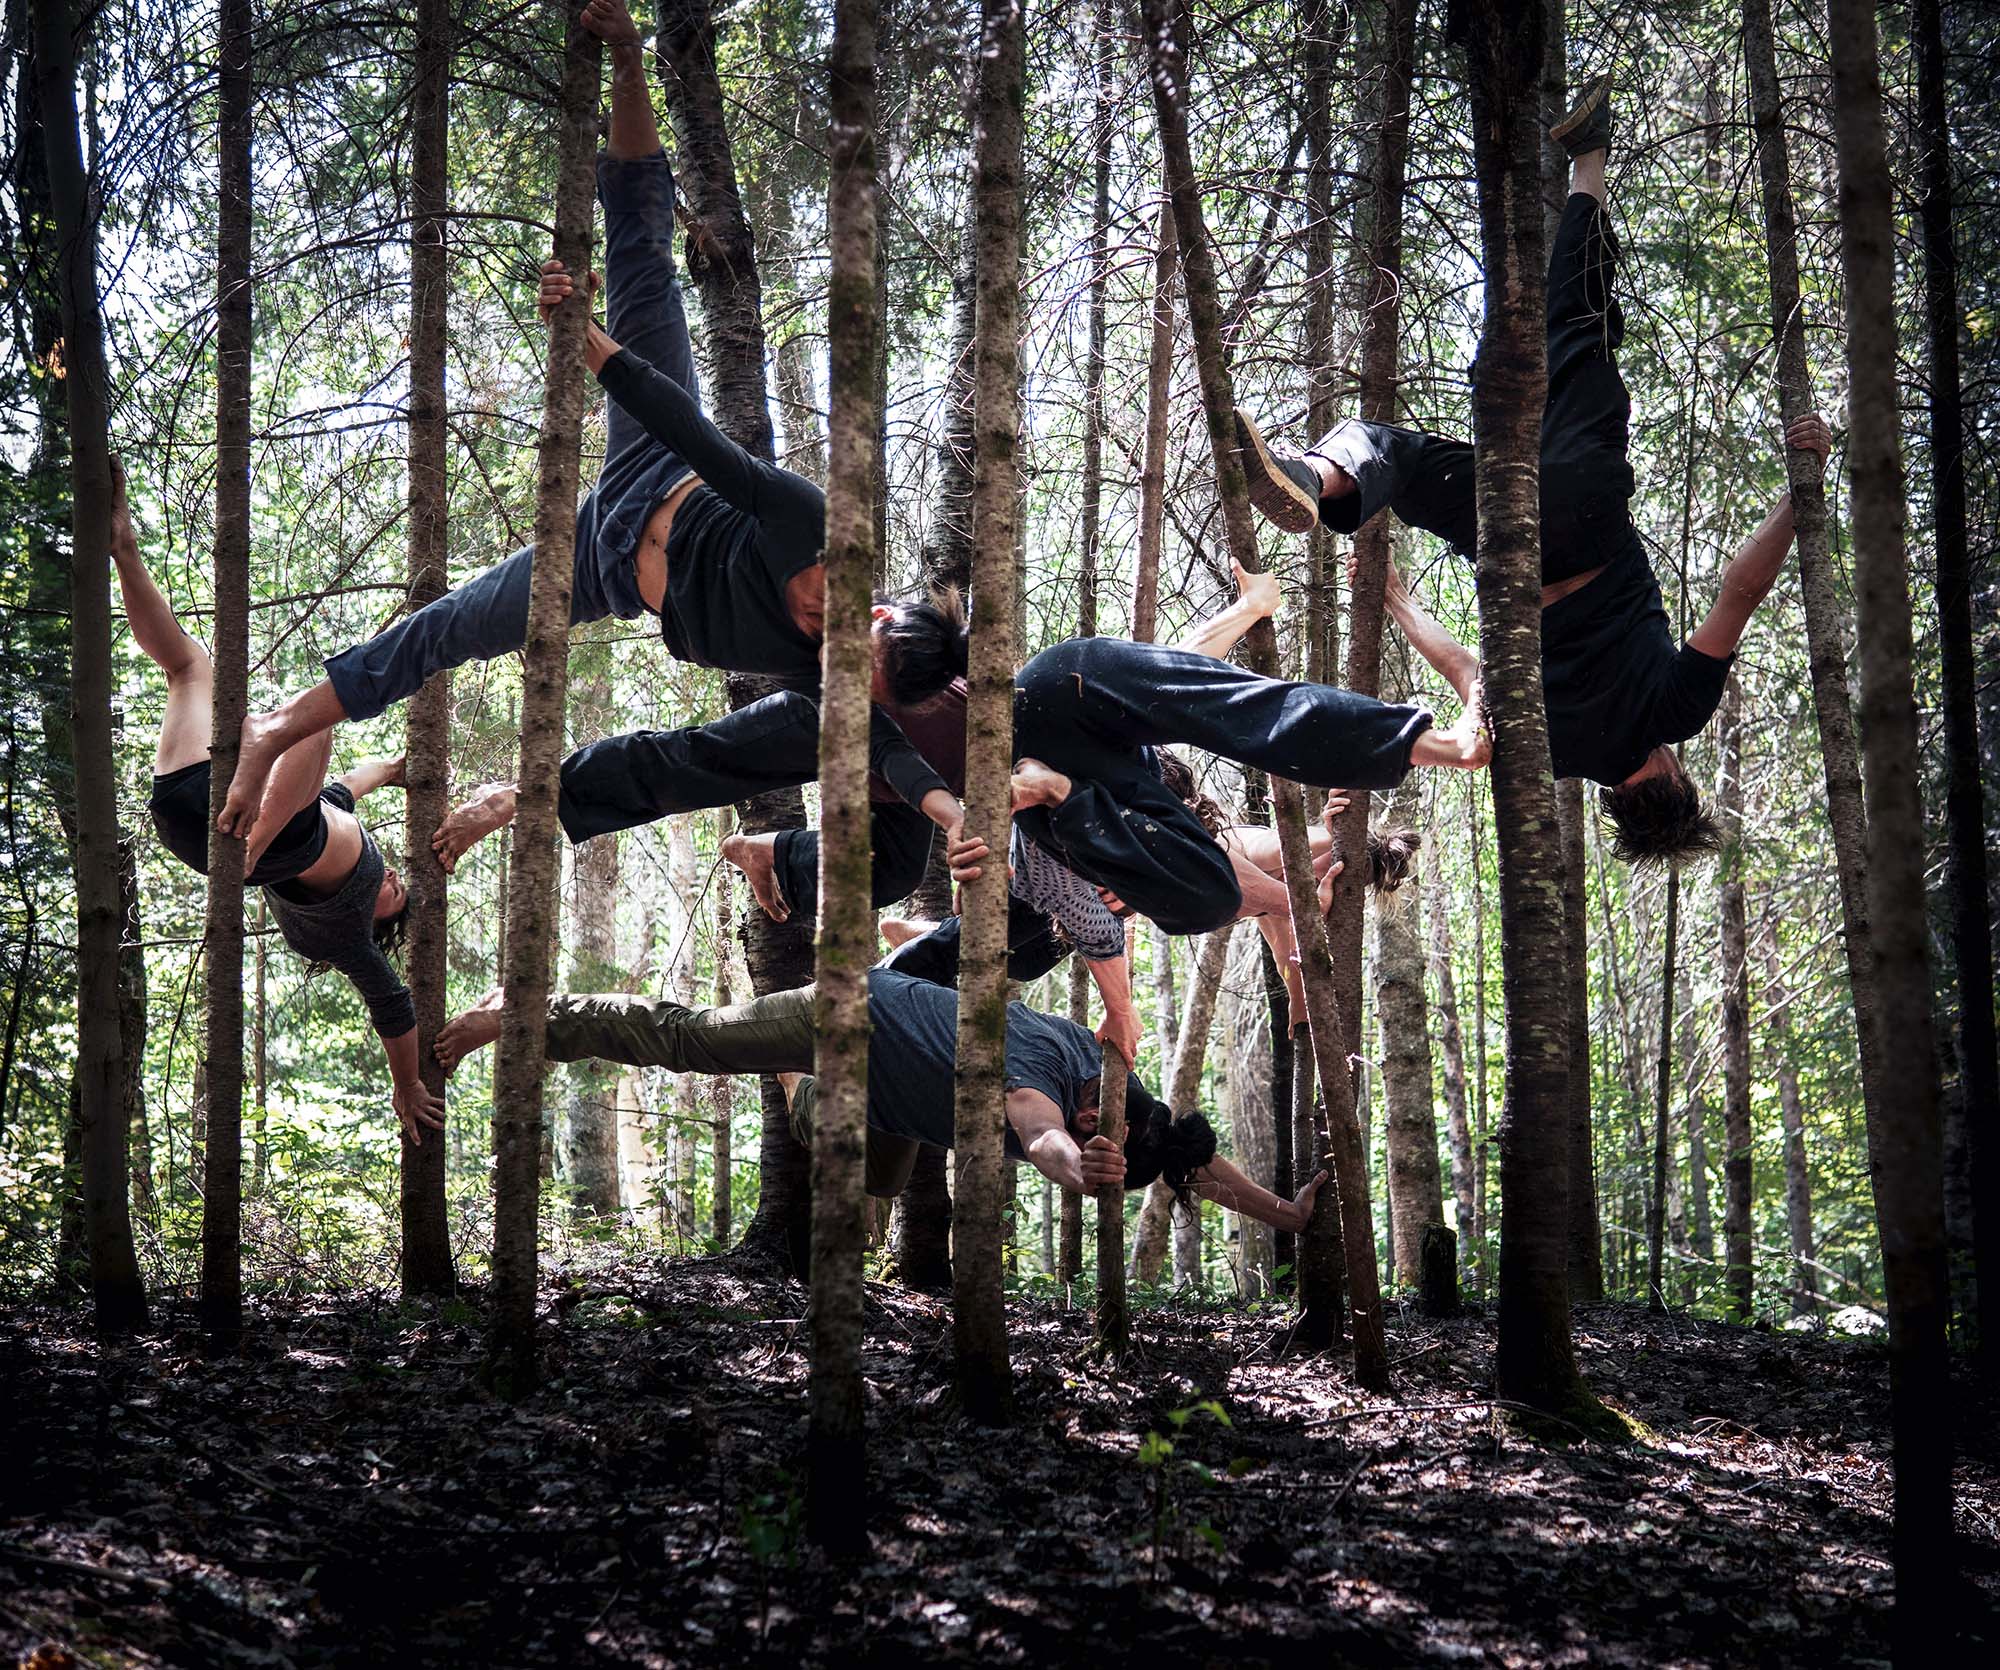 A group of circus performers in acrobatic poses, draped and reaching between trees